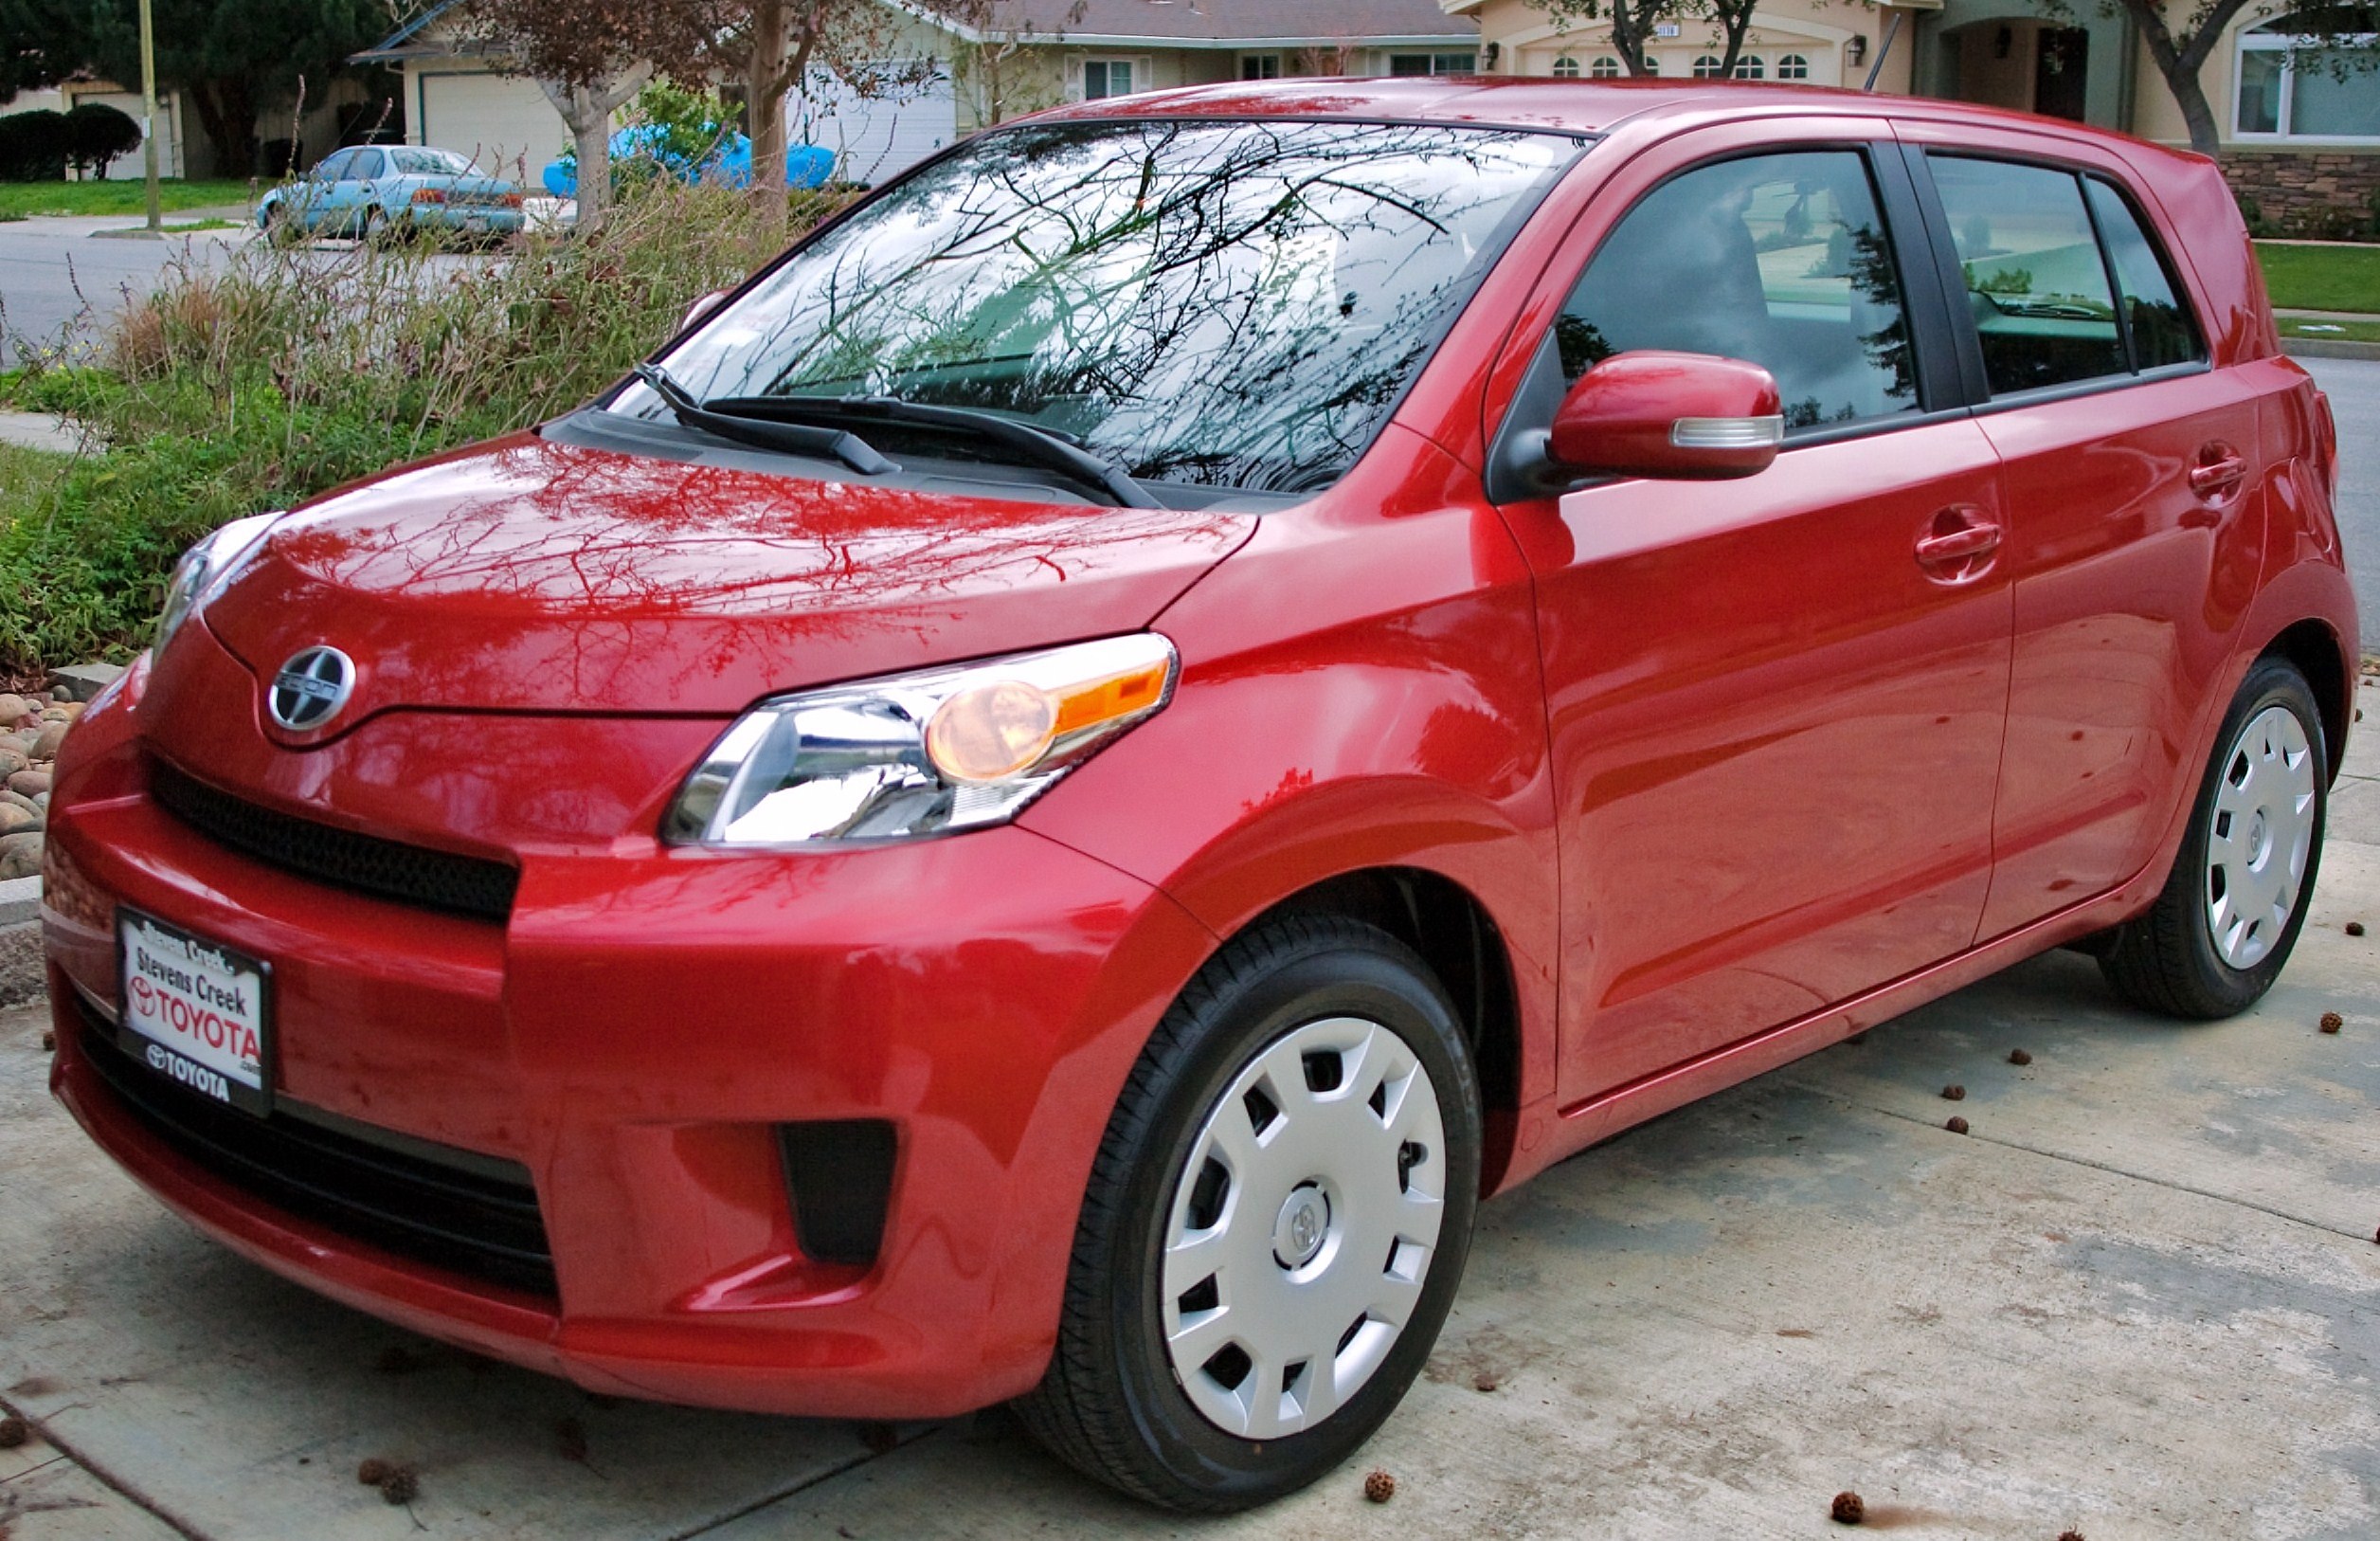 File:Scion xD red.jpg - Wikimedia Commons